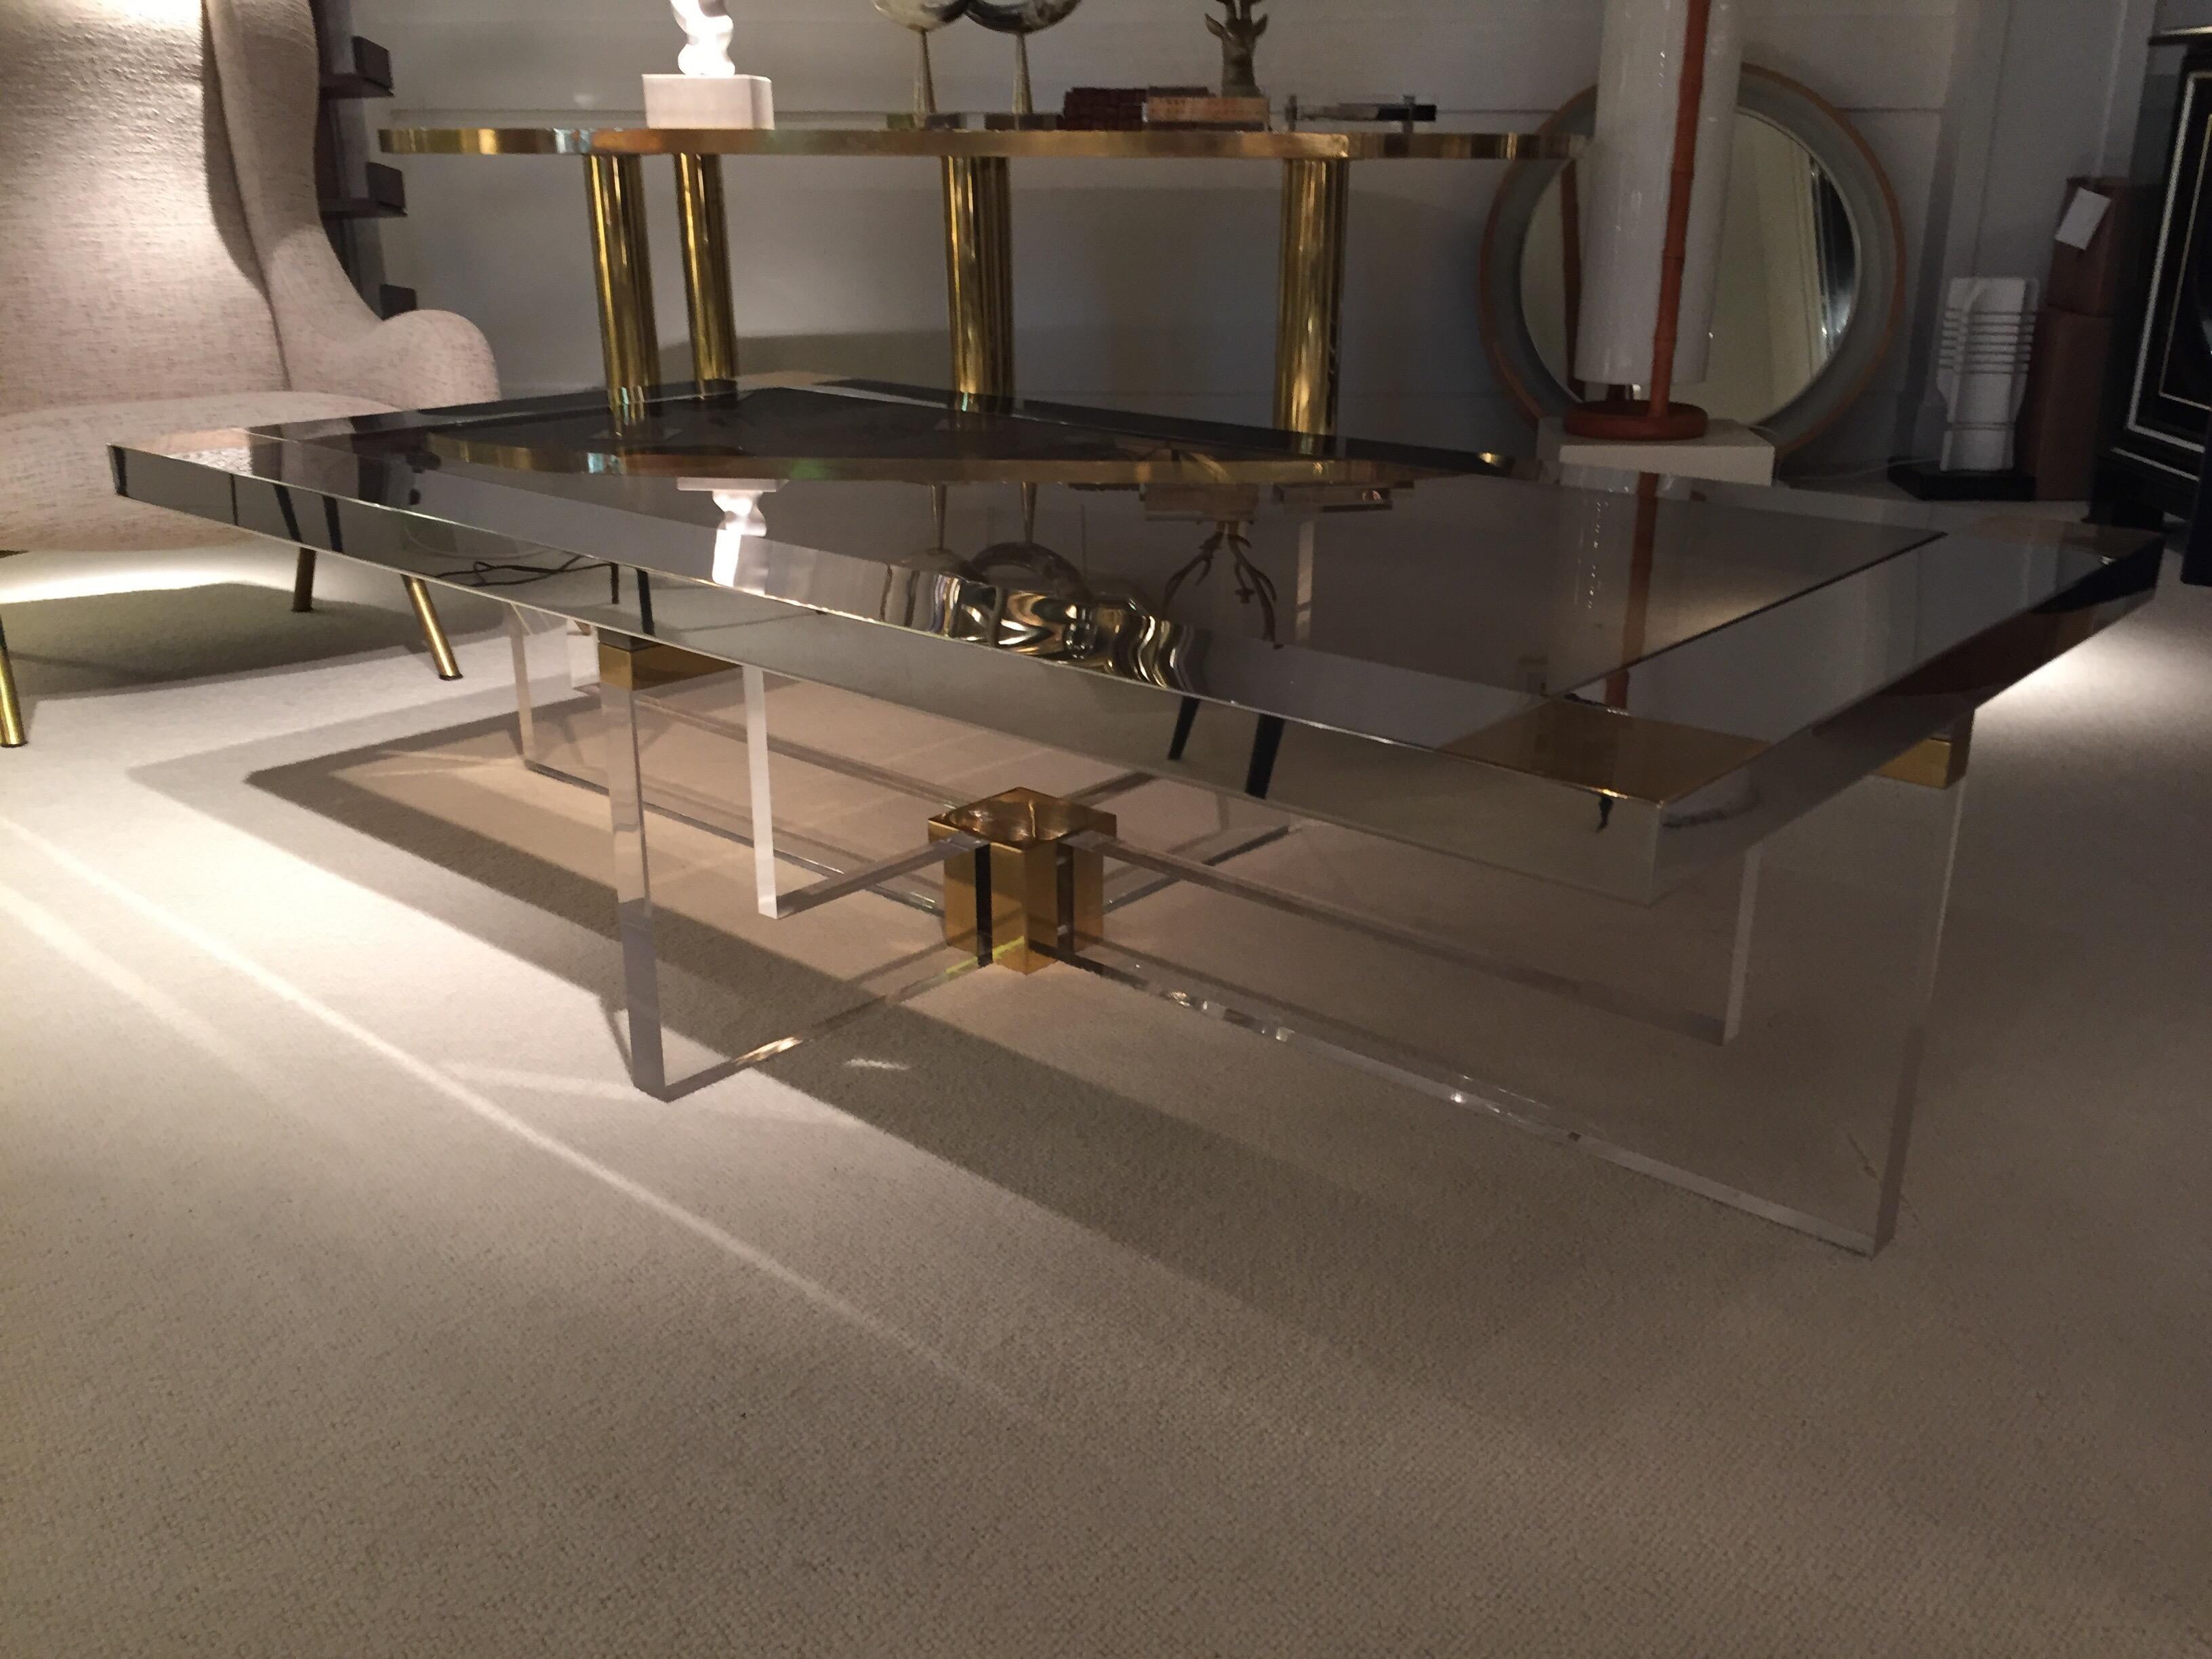 1970s coffee table in Lucite feet with chrome and brass details.
Design by Sándro Petti and retailed by Maison Jansen
Smoked glass top.
Great vintage condition.